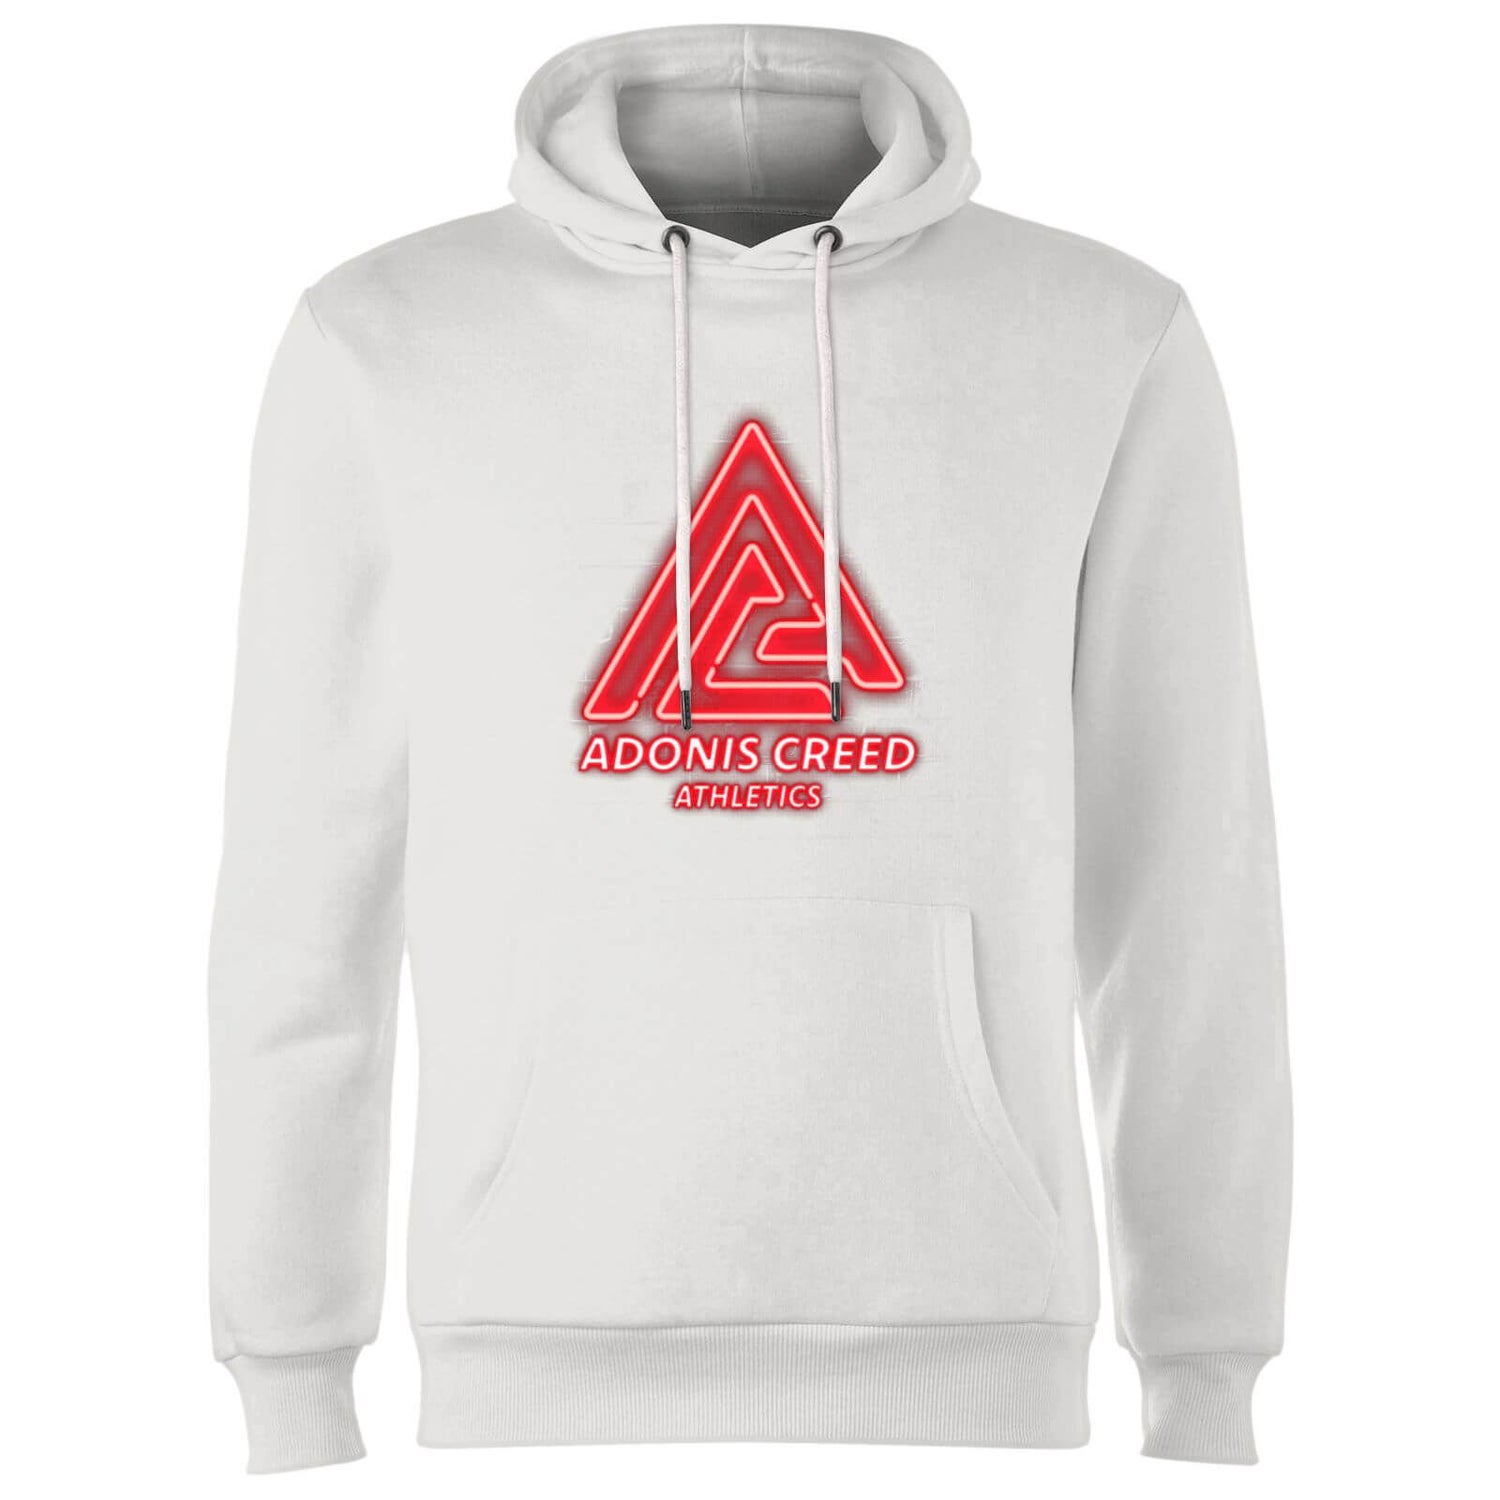 Creed Adonis Creed Athletics Neon Sign Hoodie - White - S